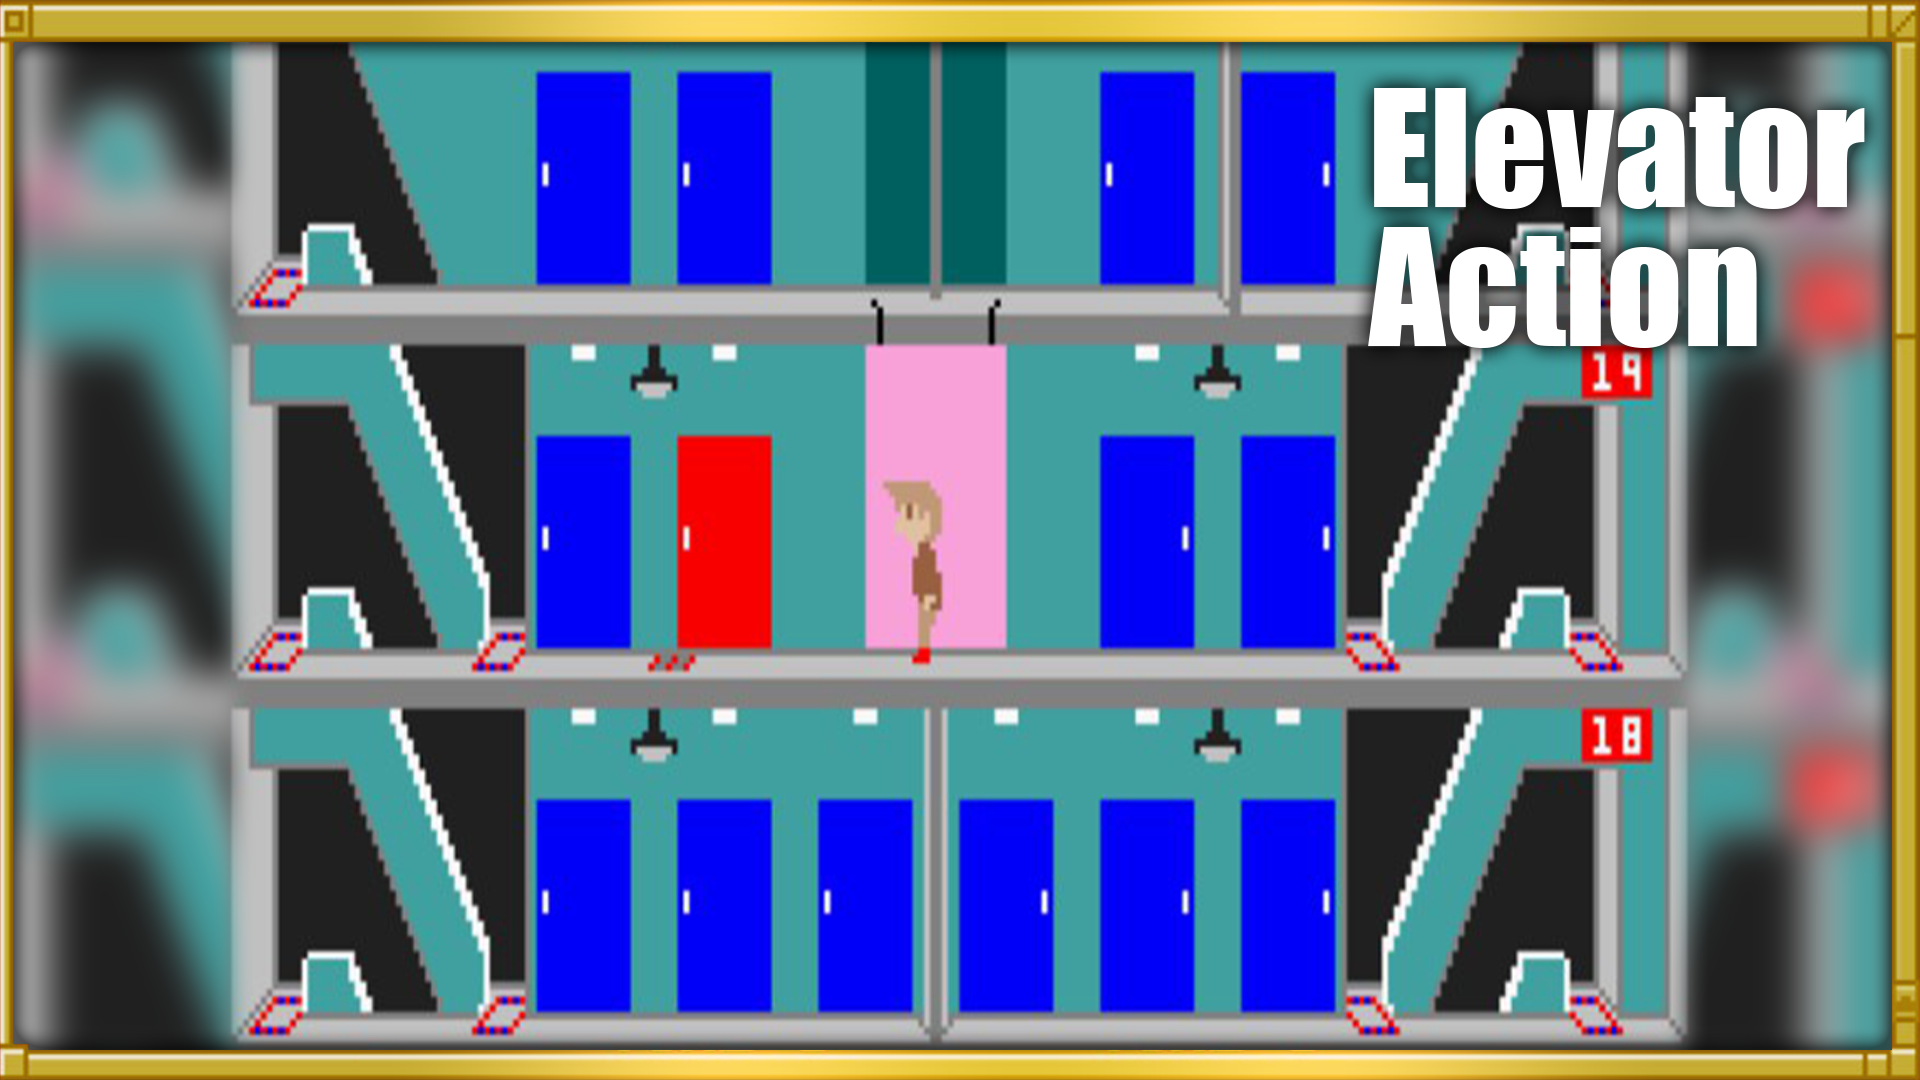 Playing "Elevator Action"